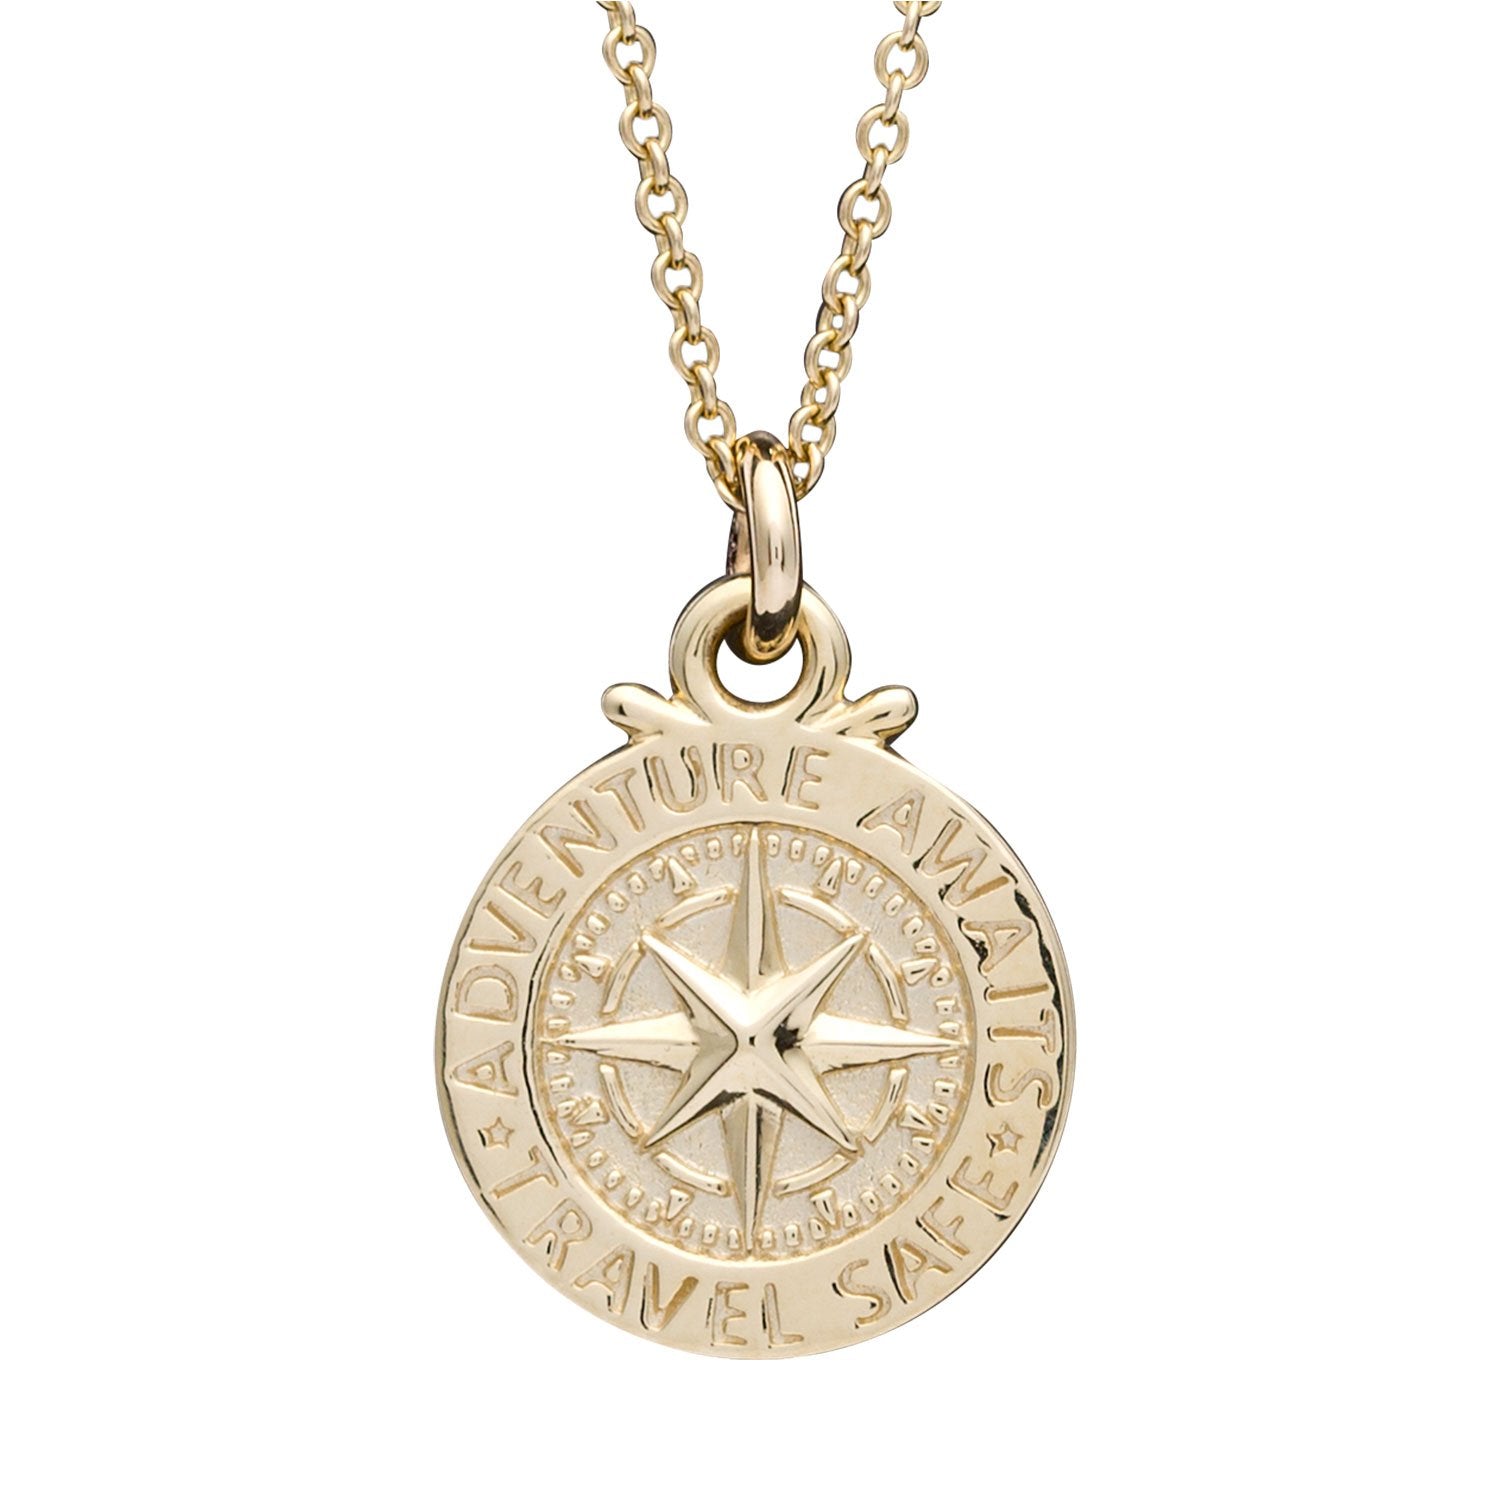 Compass Pendants For Travelers - Symbolizing Adventure And Exploration